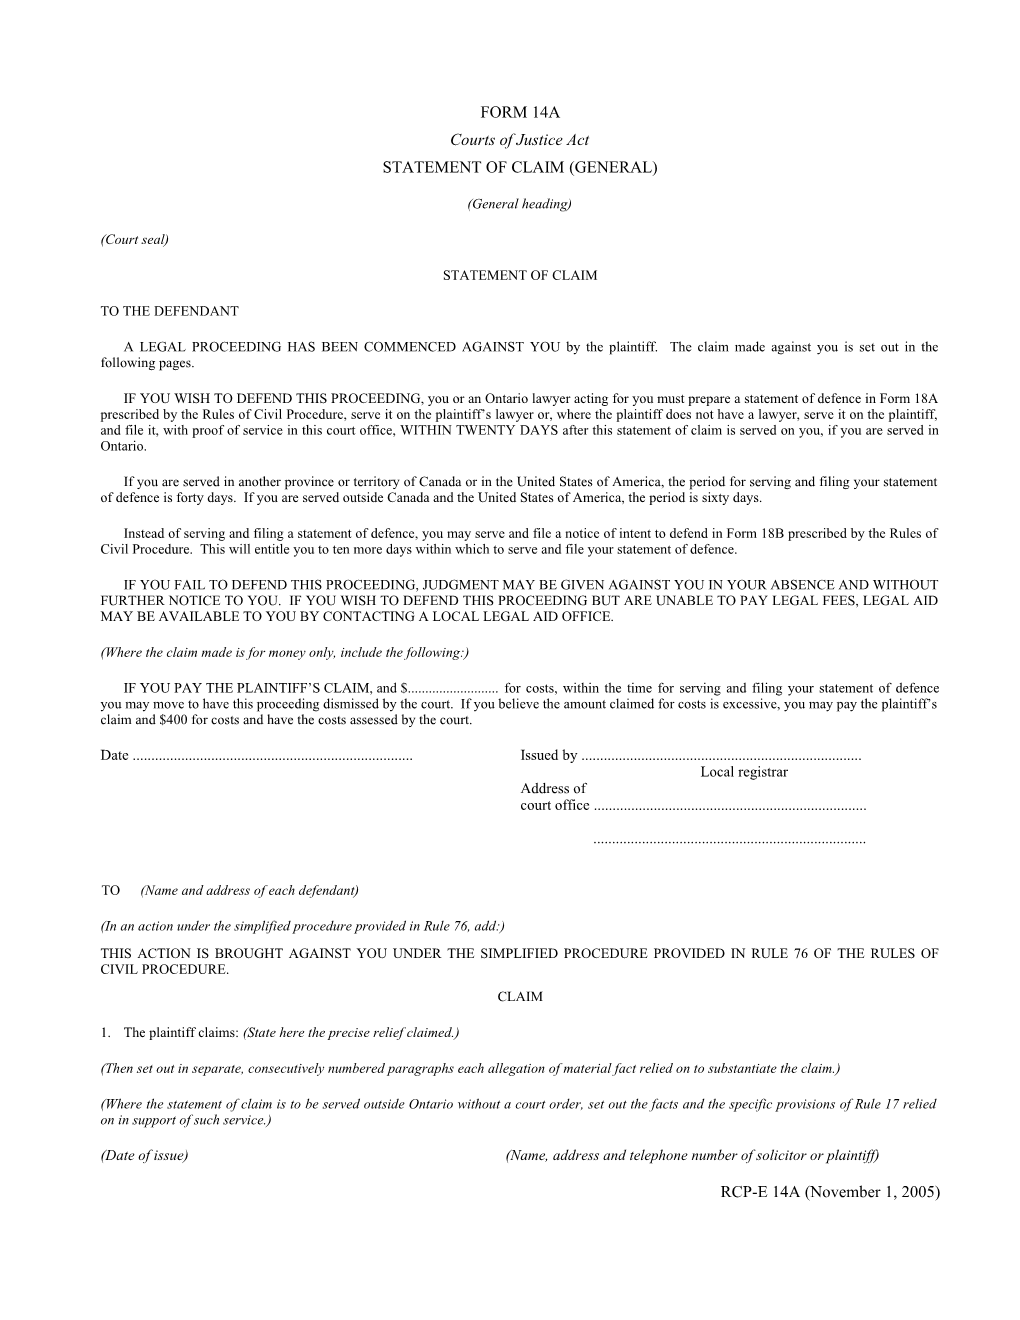 Form 14A Statement of Claim (General)